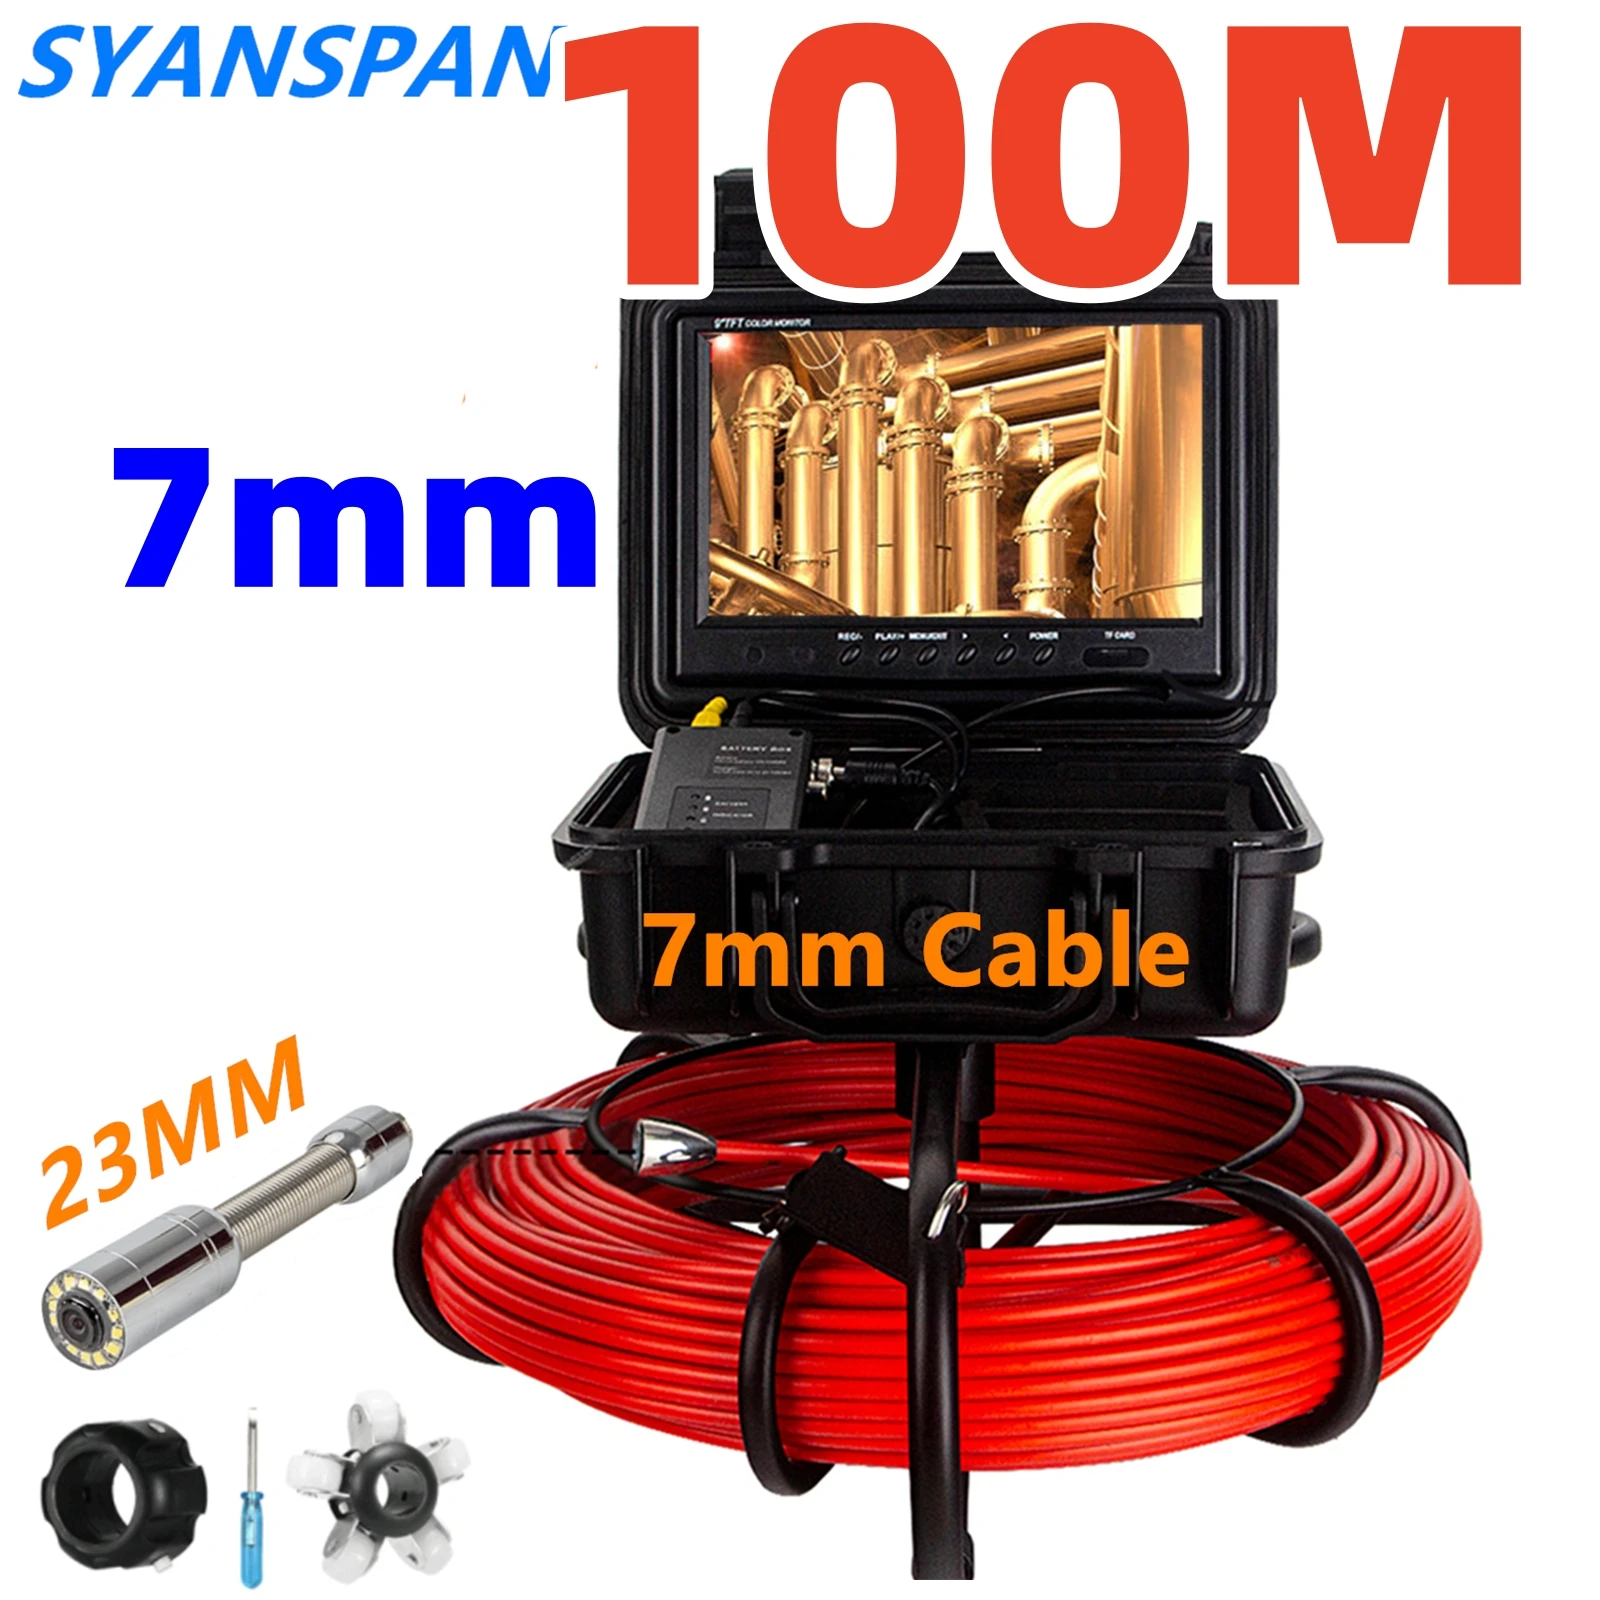 

7mm Cable 100M Pipe Inspection Video Camera 9 Inch with DVR 8GB TF Card , SYANSPAN Waterpoof 23MM Drain Sewer Pipeline Endoscope